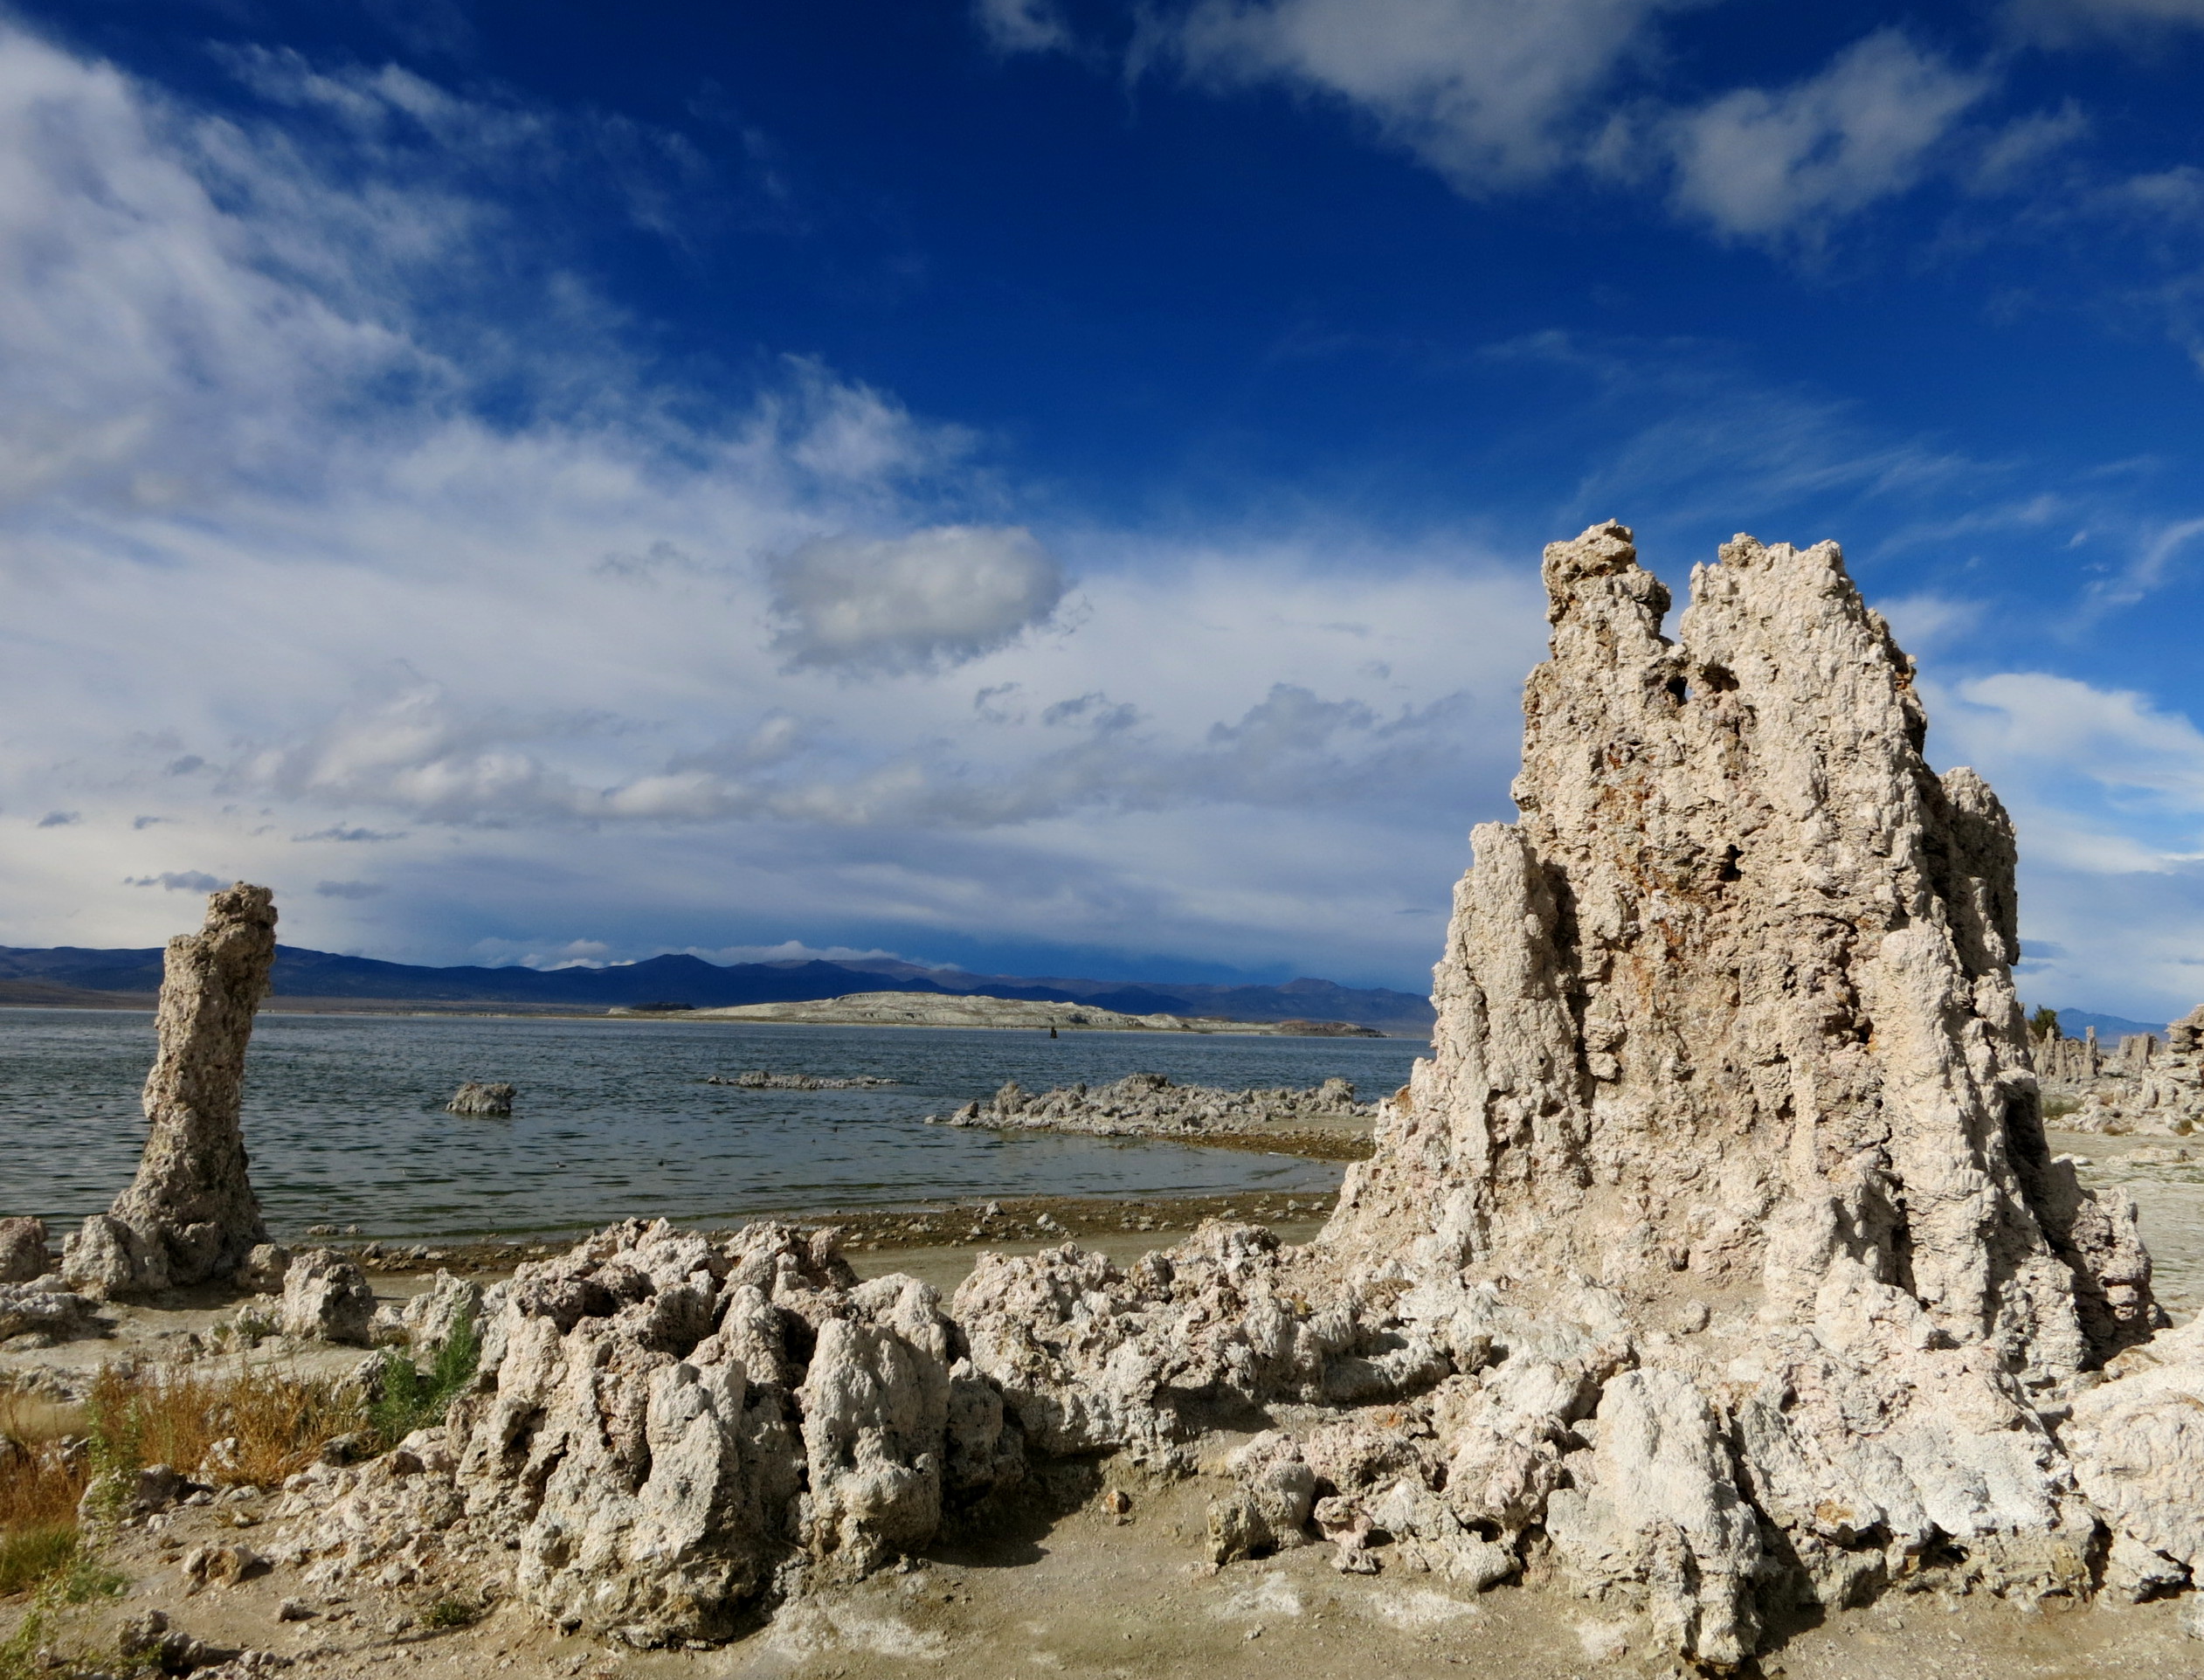 The other-worldly tufa towers are just one of Mono Lake's attractions. Image by Clifton Wilkinson / Lonely Planet